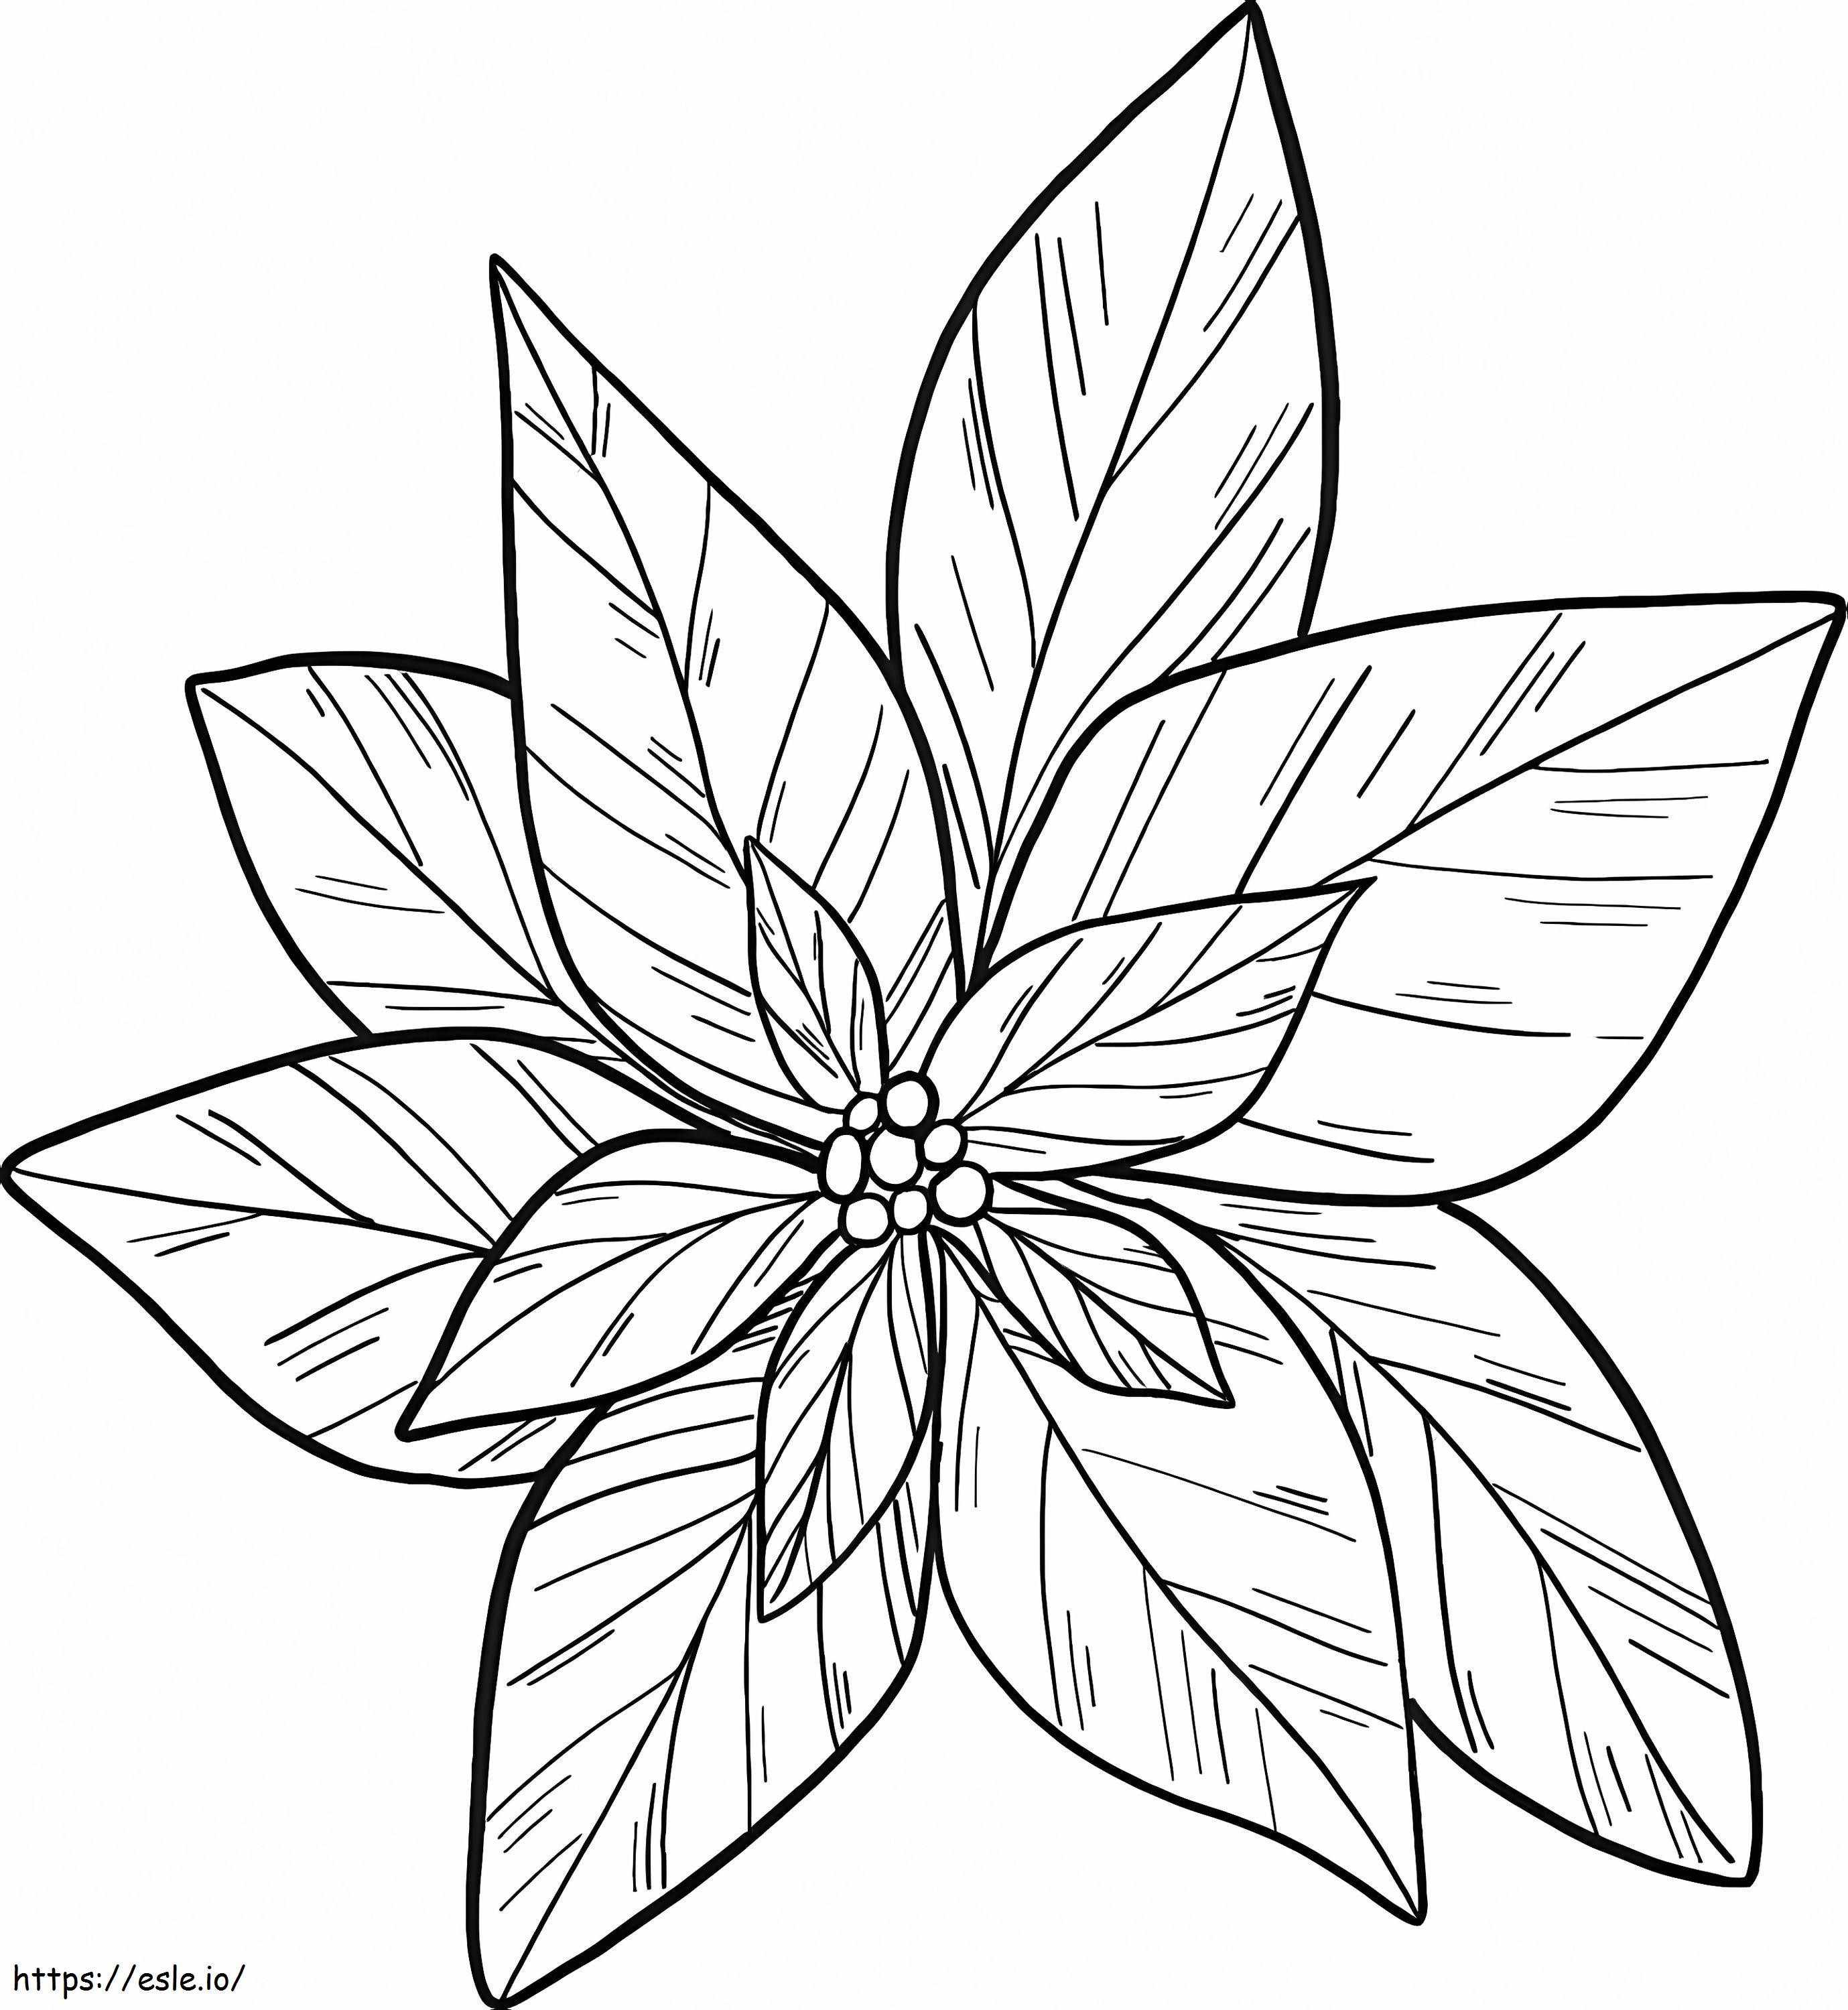 Poinsettia Flower To Color coloring page